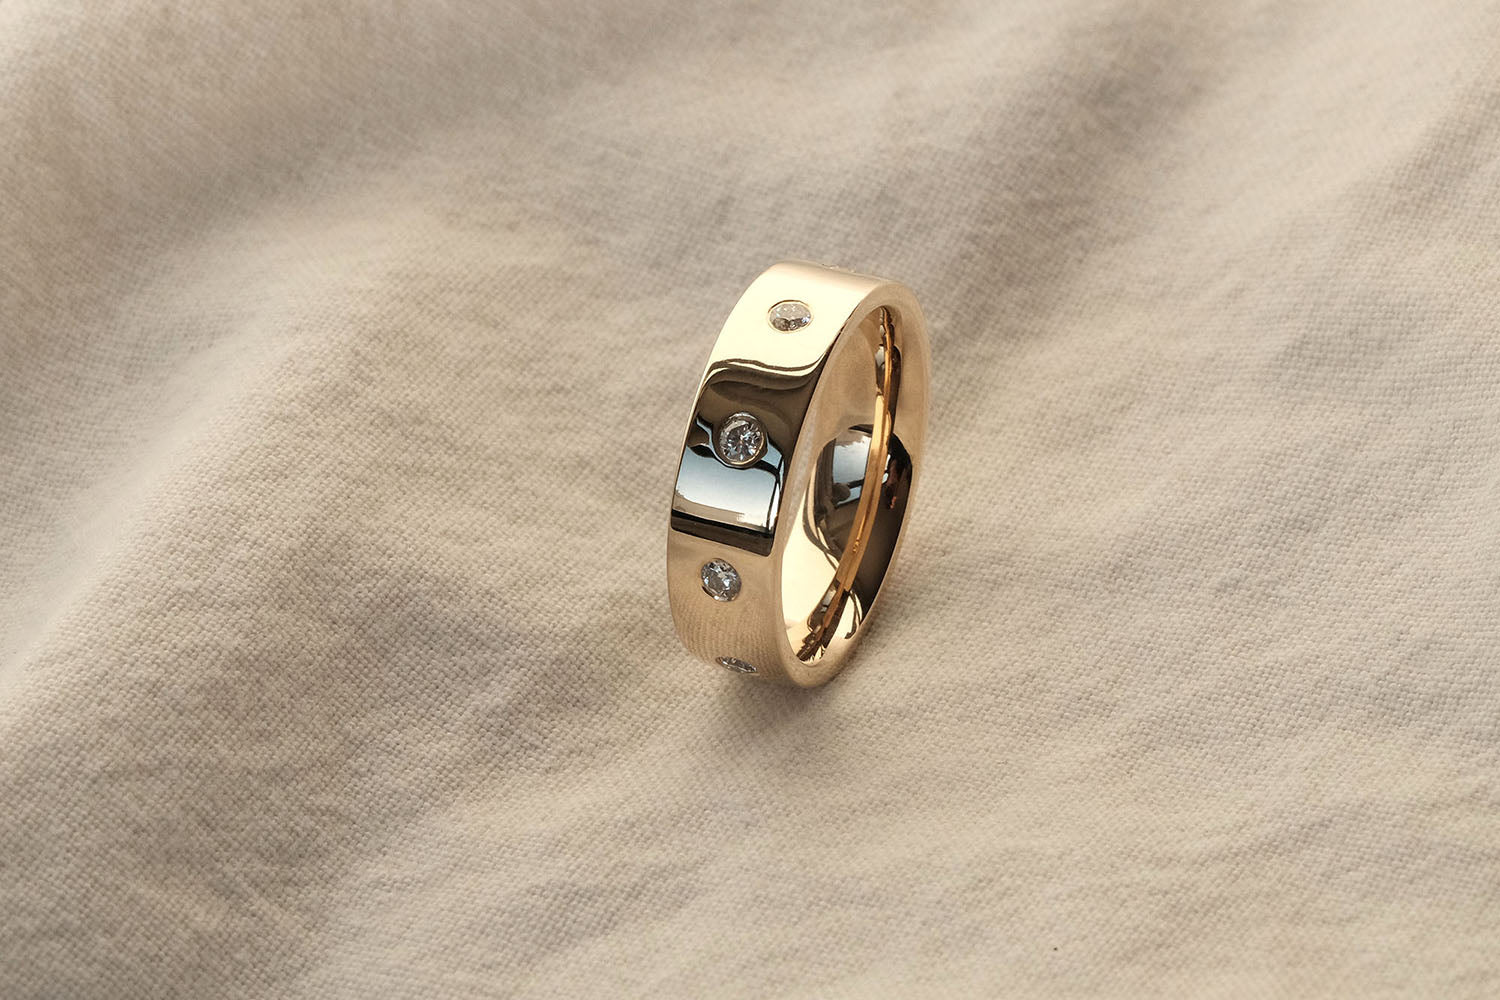 Louis Vuitton Pre-owned Women's Yellow Gold Ring - Gold - One Size